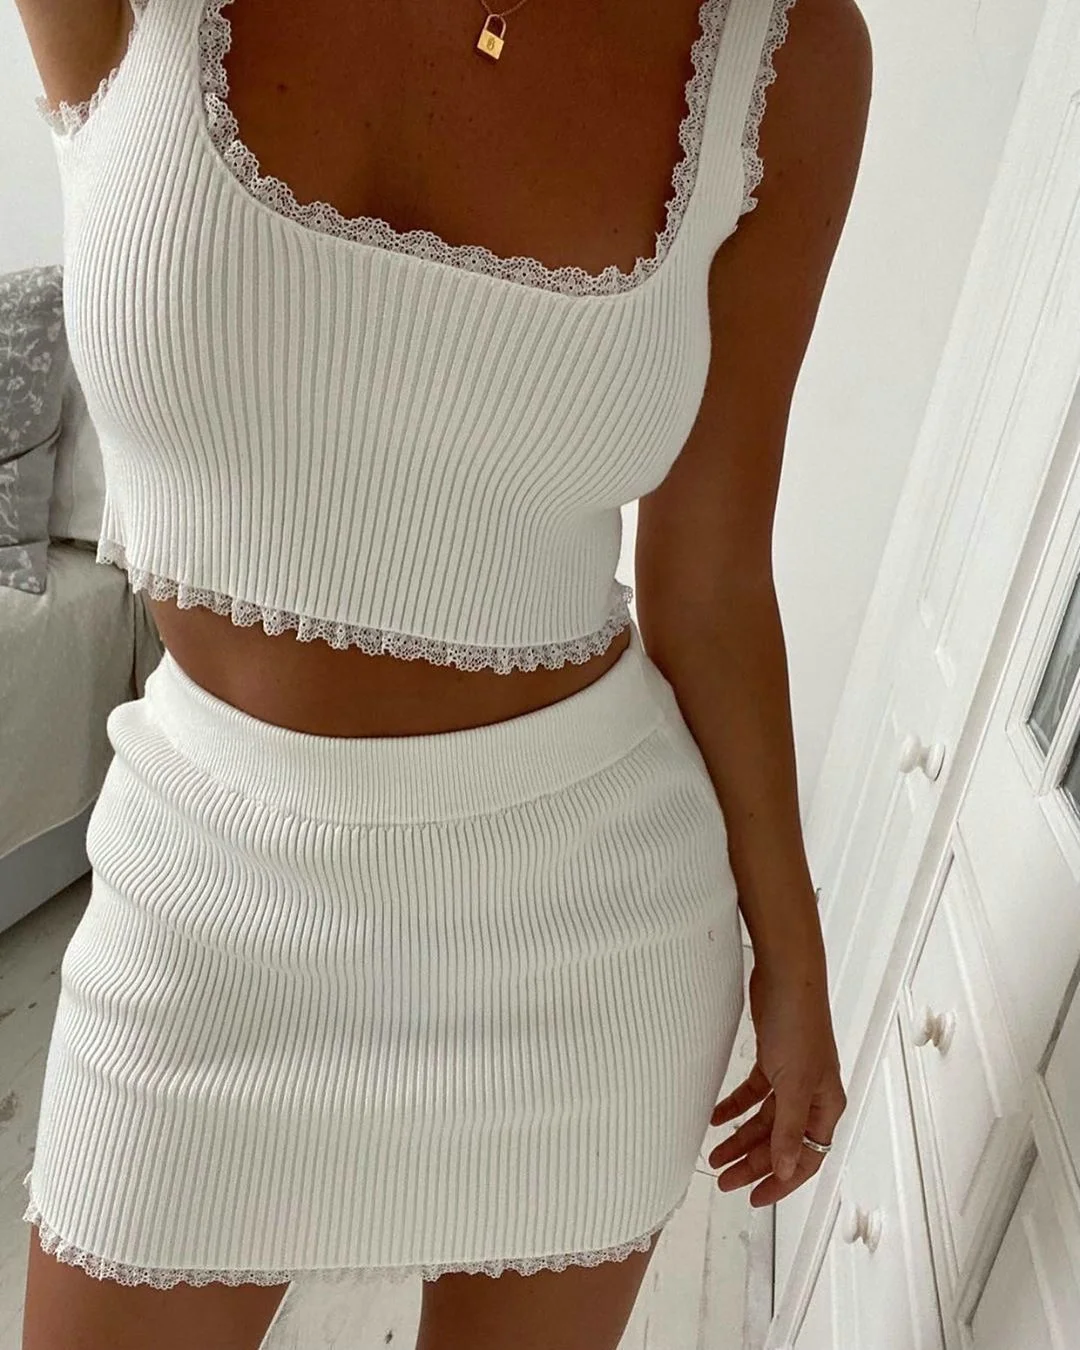 Elegant Lace Trim Ribbed White 2 Pieces Sets Women Solid Color U-Neck Crop Tank Tops+Mini Bodycon Skirt Summer Lady Outfits